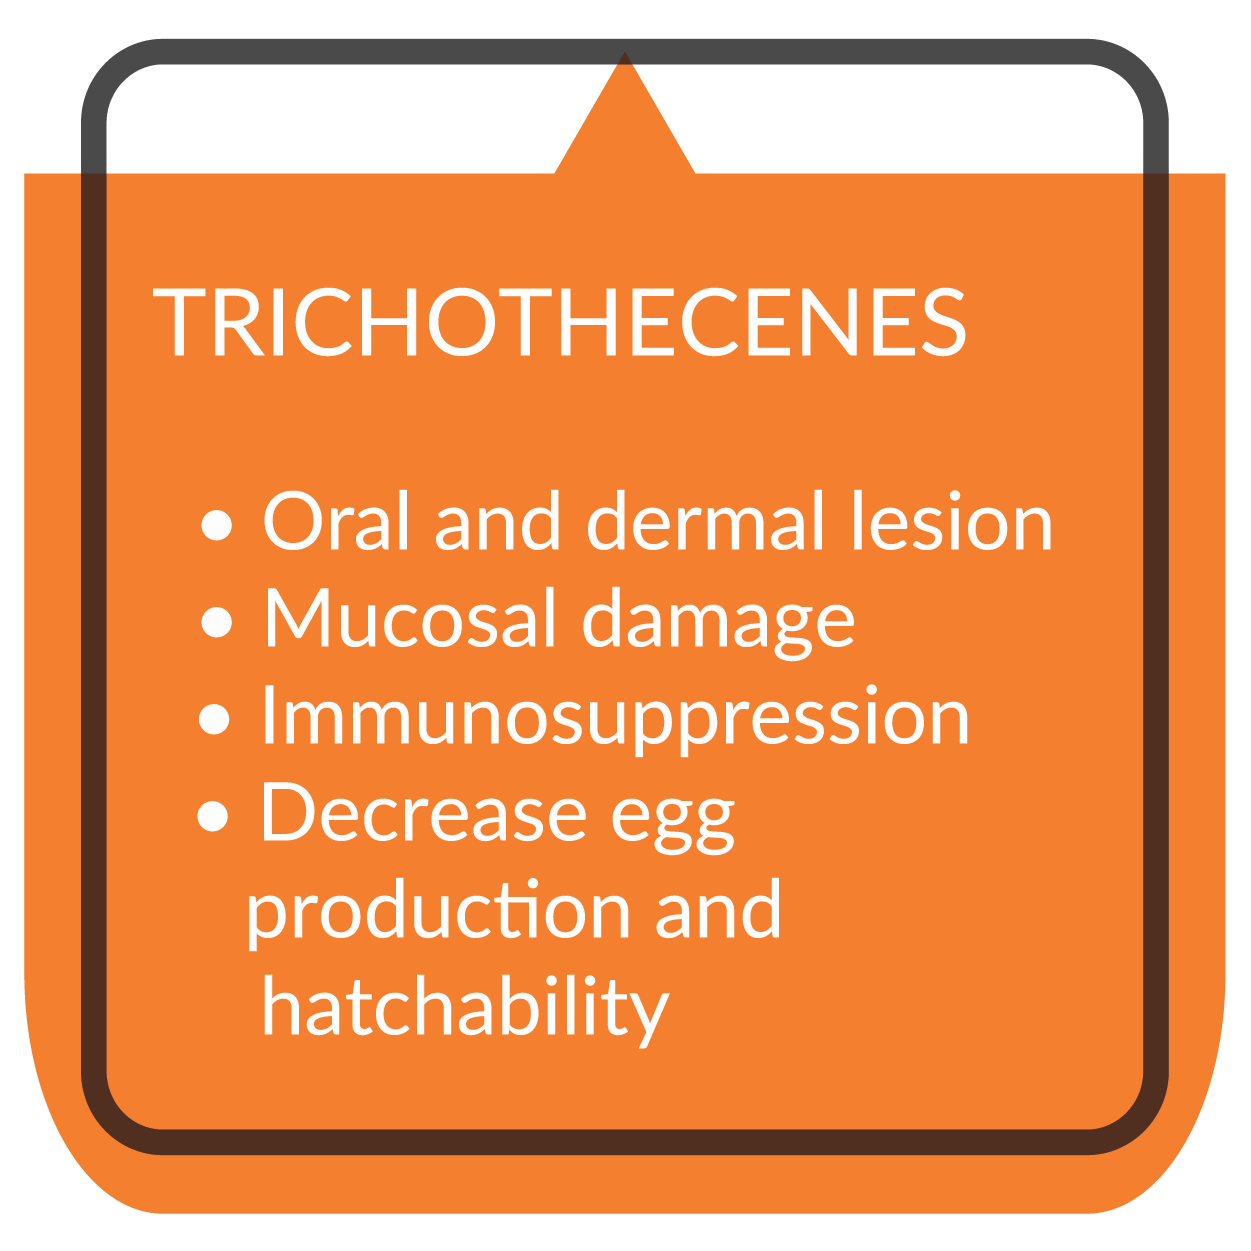 kaa Toxfin Poultry TRICHOTHECENES infographic  v2